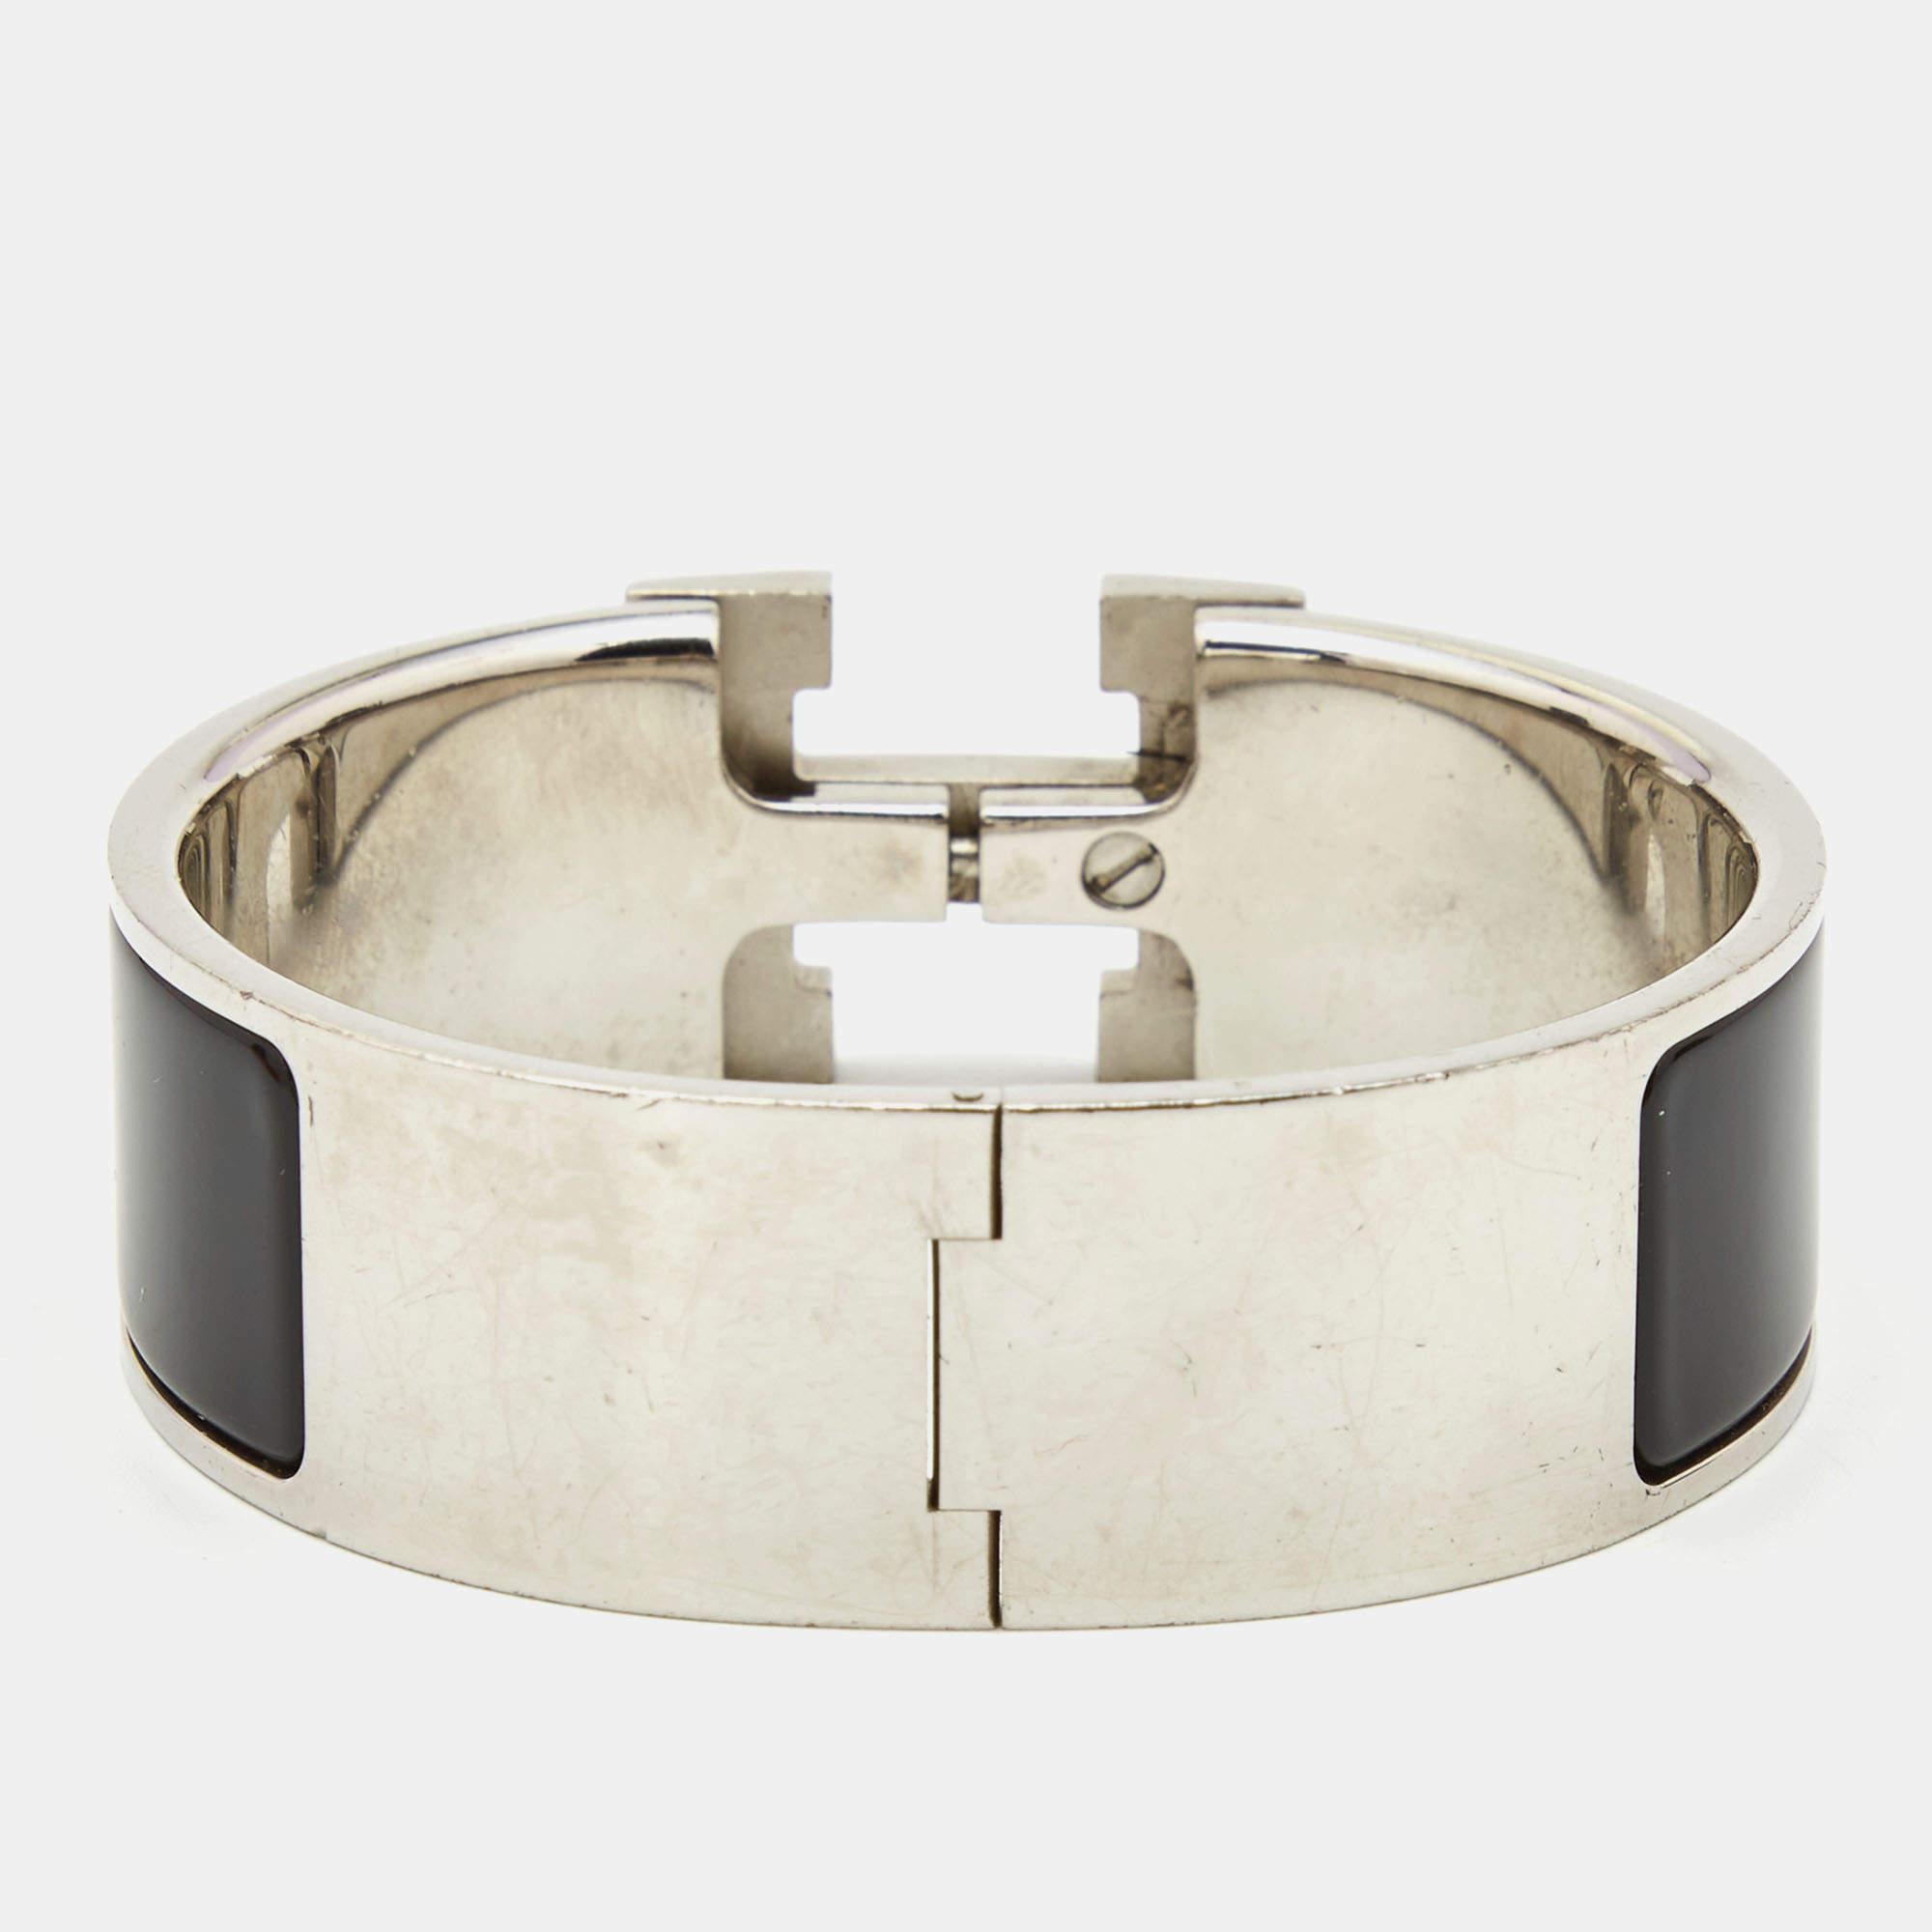 This bracelet embodies Hermès’ elegant craftsmanship with its palladium-plated metal body coated with black enamel. Centered by the iconic H logo of the fashion house, this bracelet is the accessory to buy today!

Includes: Brand Box ( deteriorated )